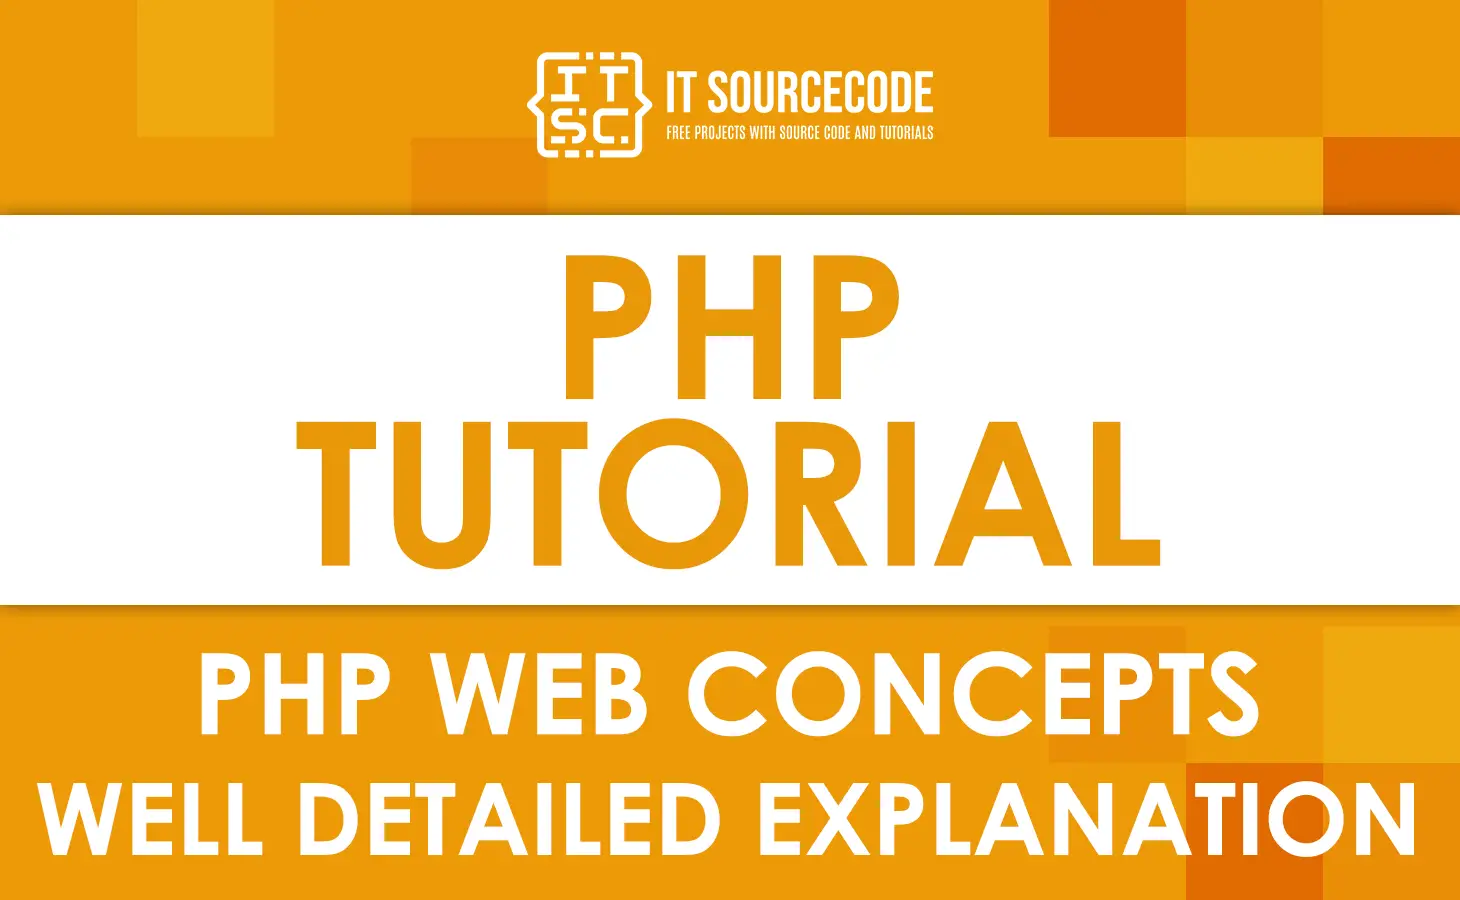 PHP Web Concepts (Well Detailed Explanation)